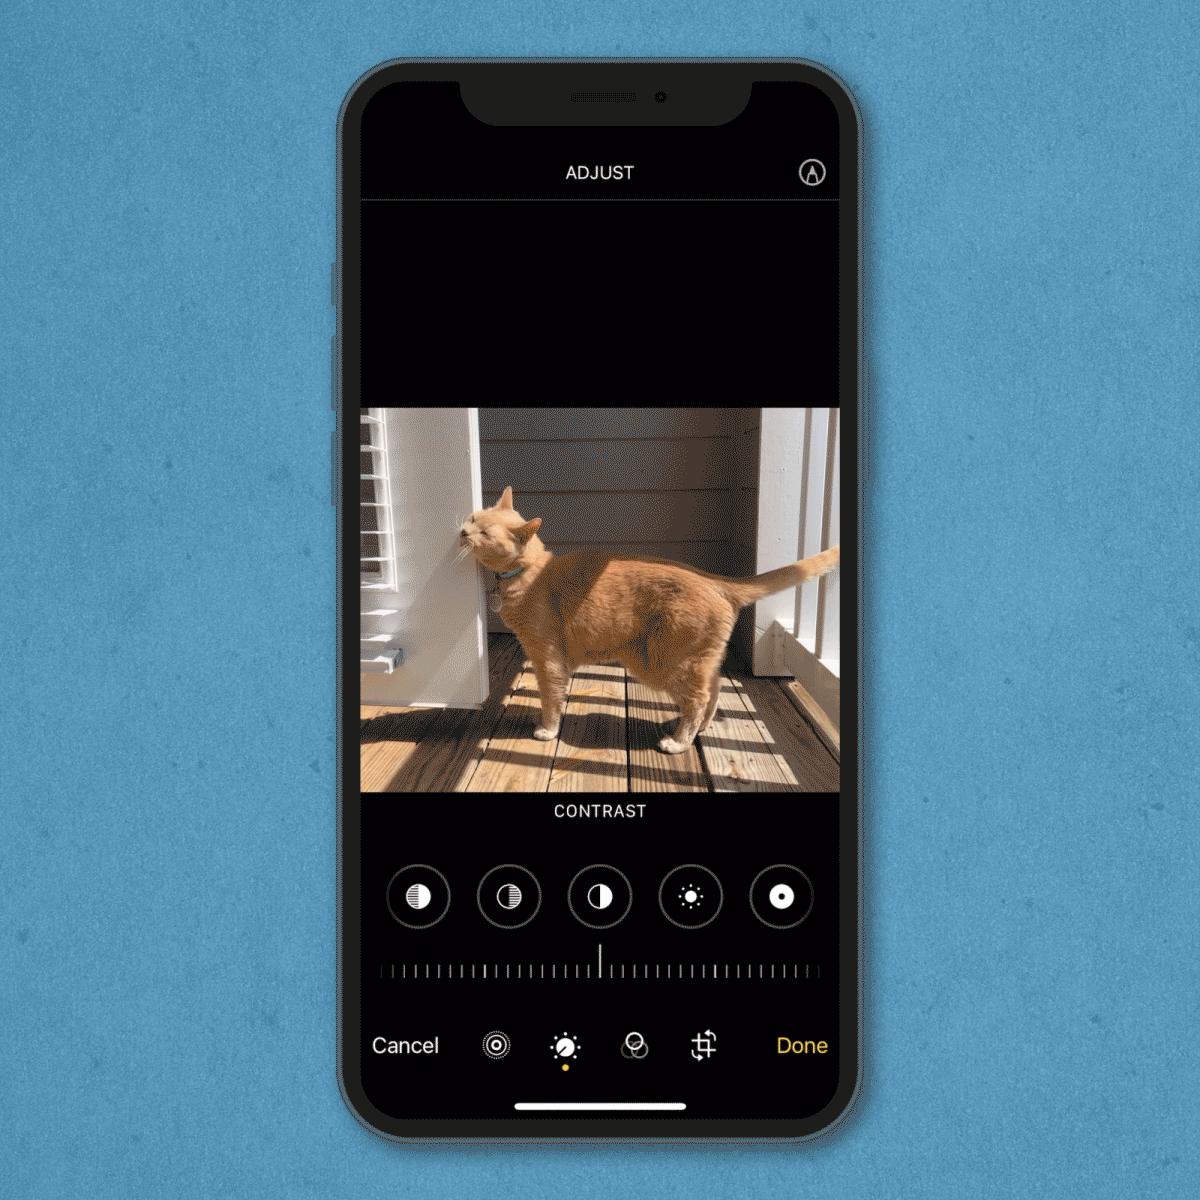 gif showing how to edit a photo's contrast on an iPhone